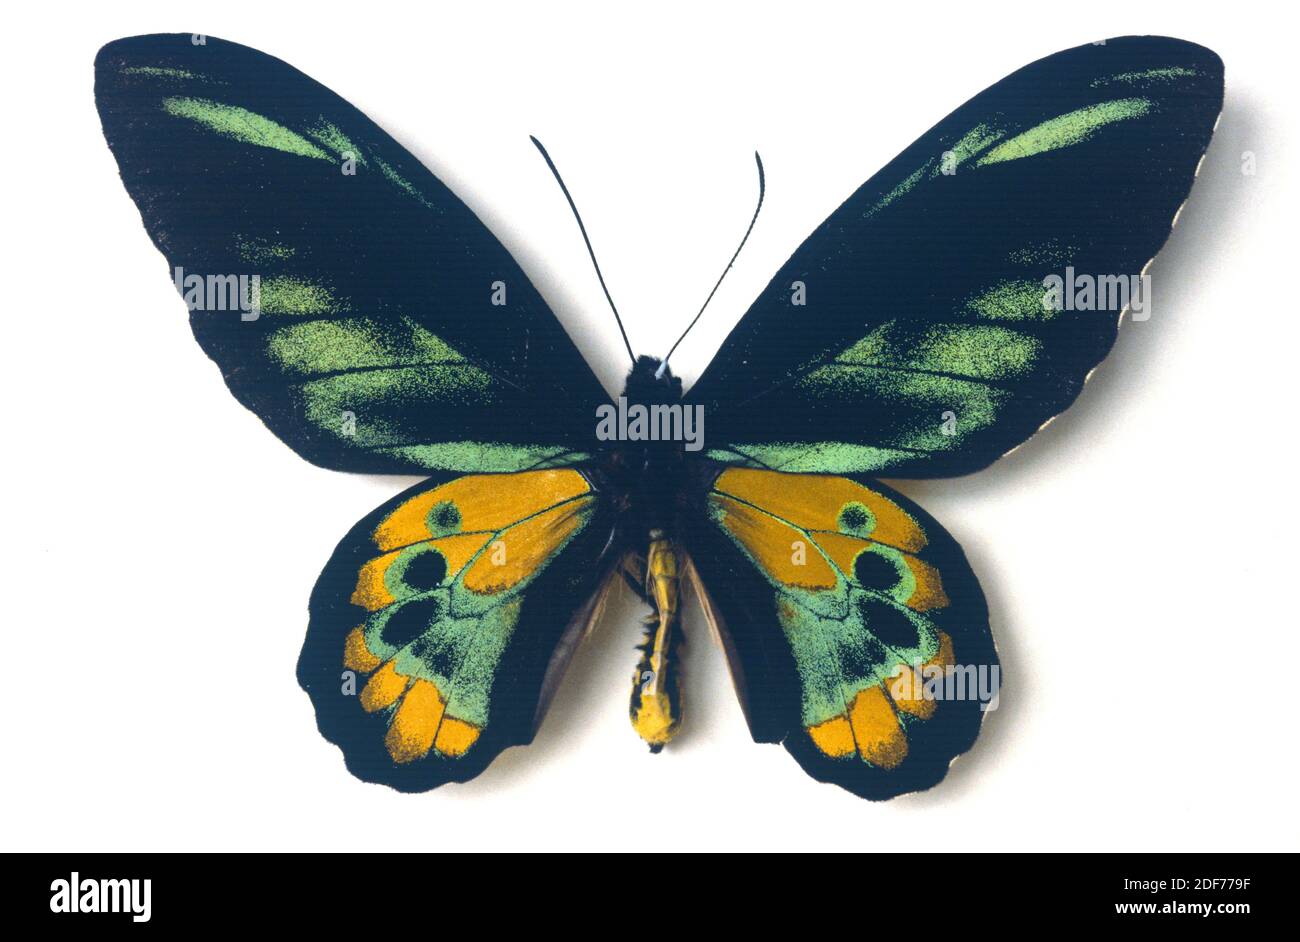 Rothschild's birdwing (Ornithoptera rothschildi) is a butterfly native to New Guinea. Male, dorsal side. Stock Photo